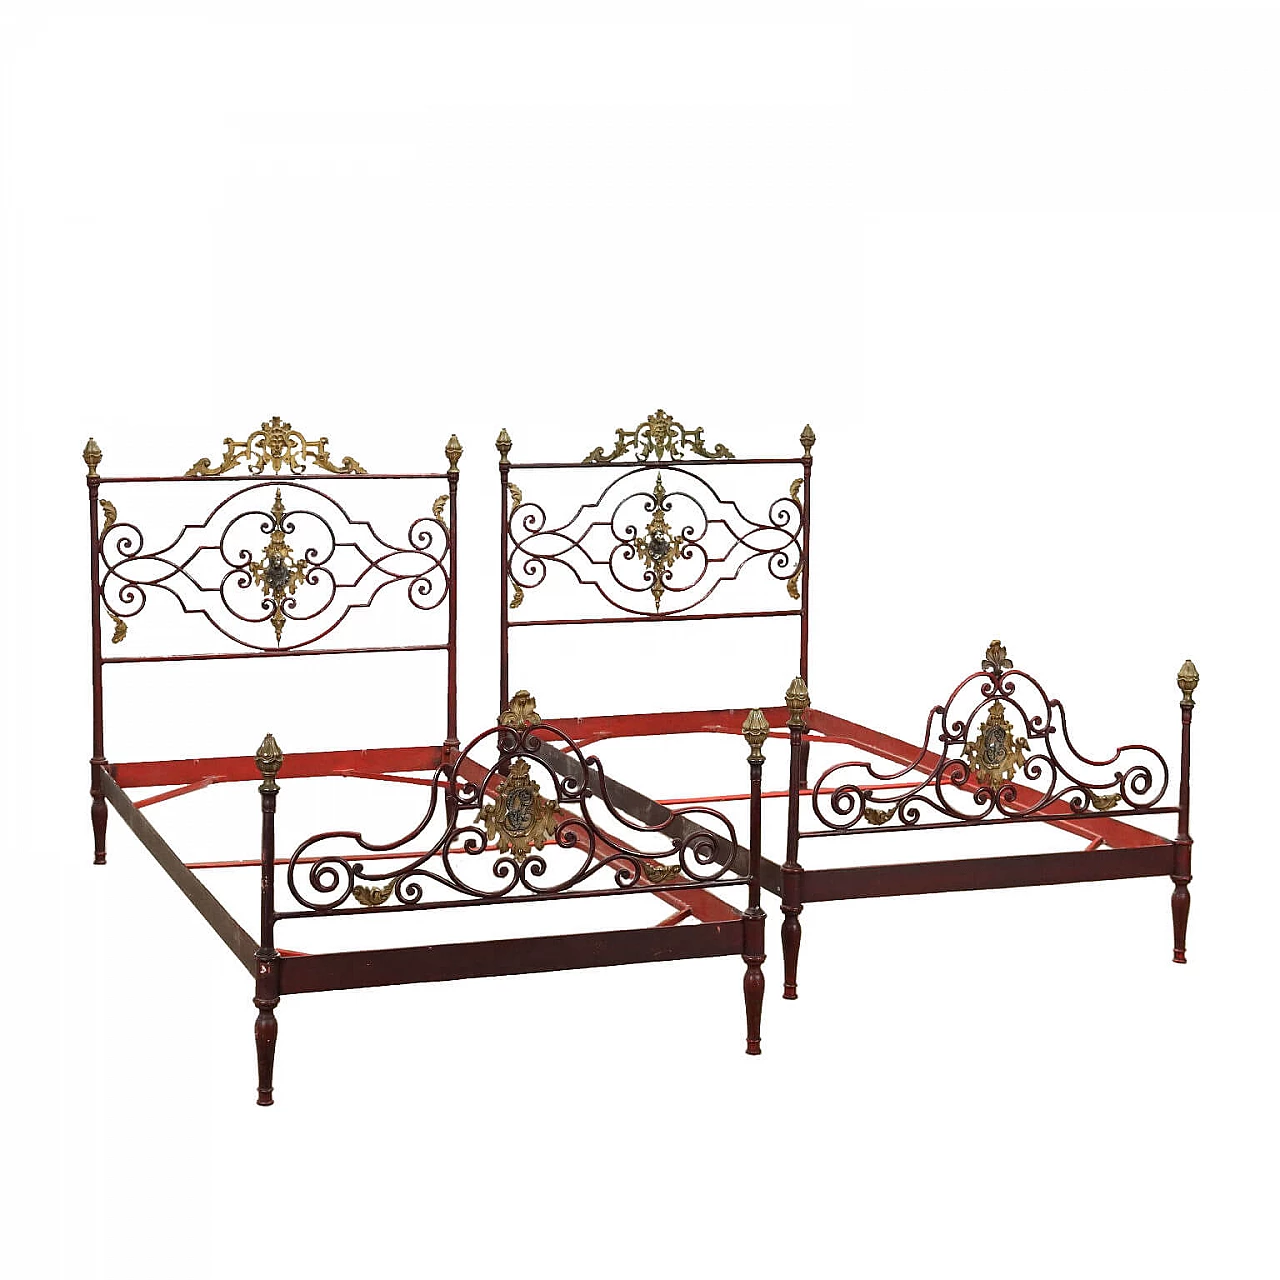 Pair of Umbertino style single beds in lacquered wrought iron, late 19th century 1